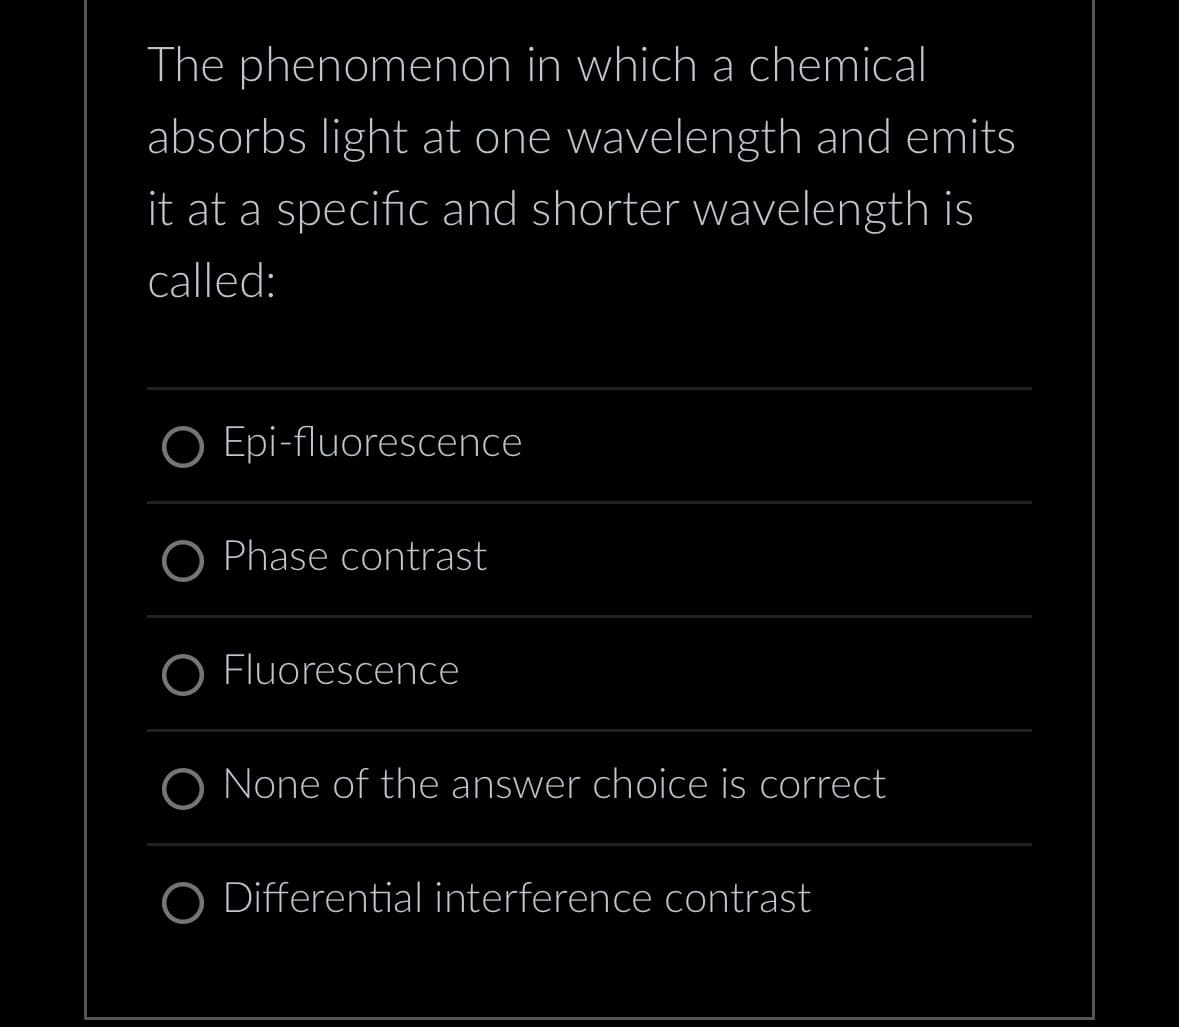 The phenomenon in which a chemical
absorbs light at one wavelength and emits
it at a specific and shorter wavelength is
called:
O Epi-fluorescence
O Phase contrast
OFluorescence
O None of the answer choice is correct
Differential interference contrast